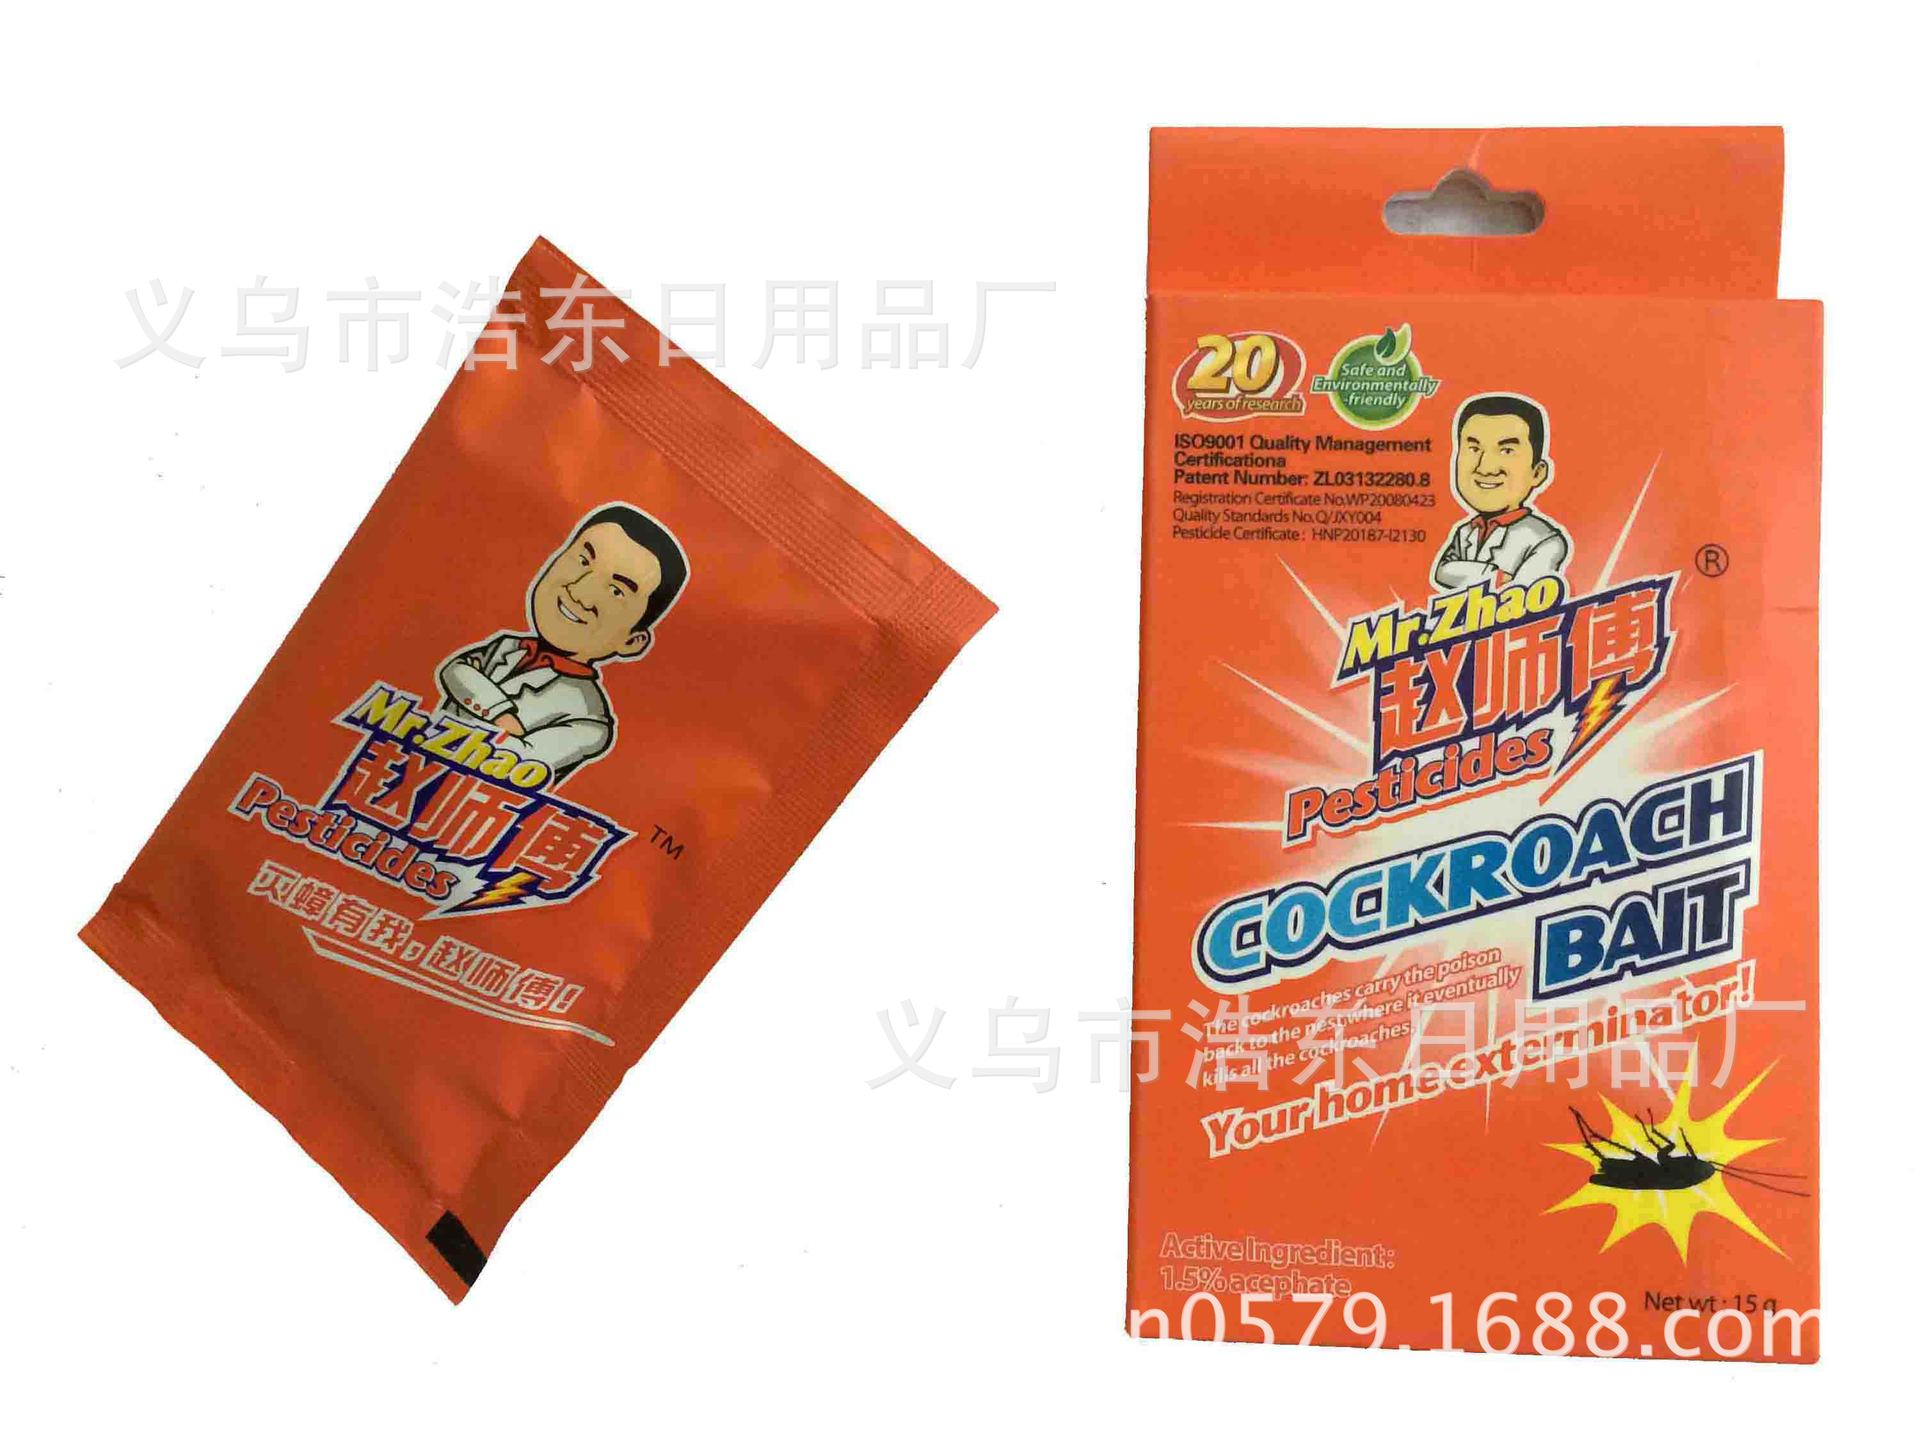 Master Zhao 15 cockroaches powder